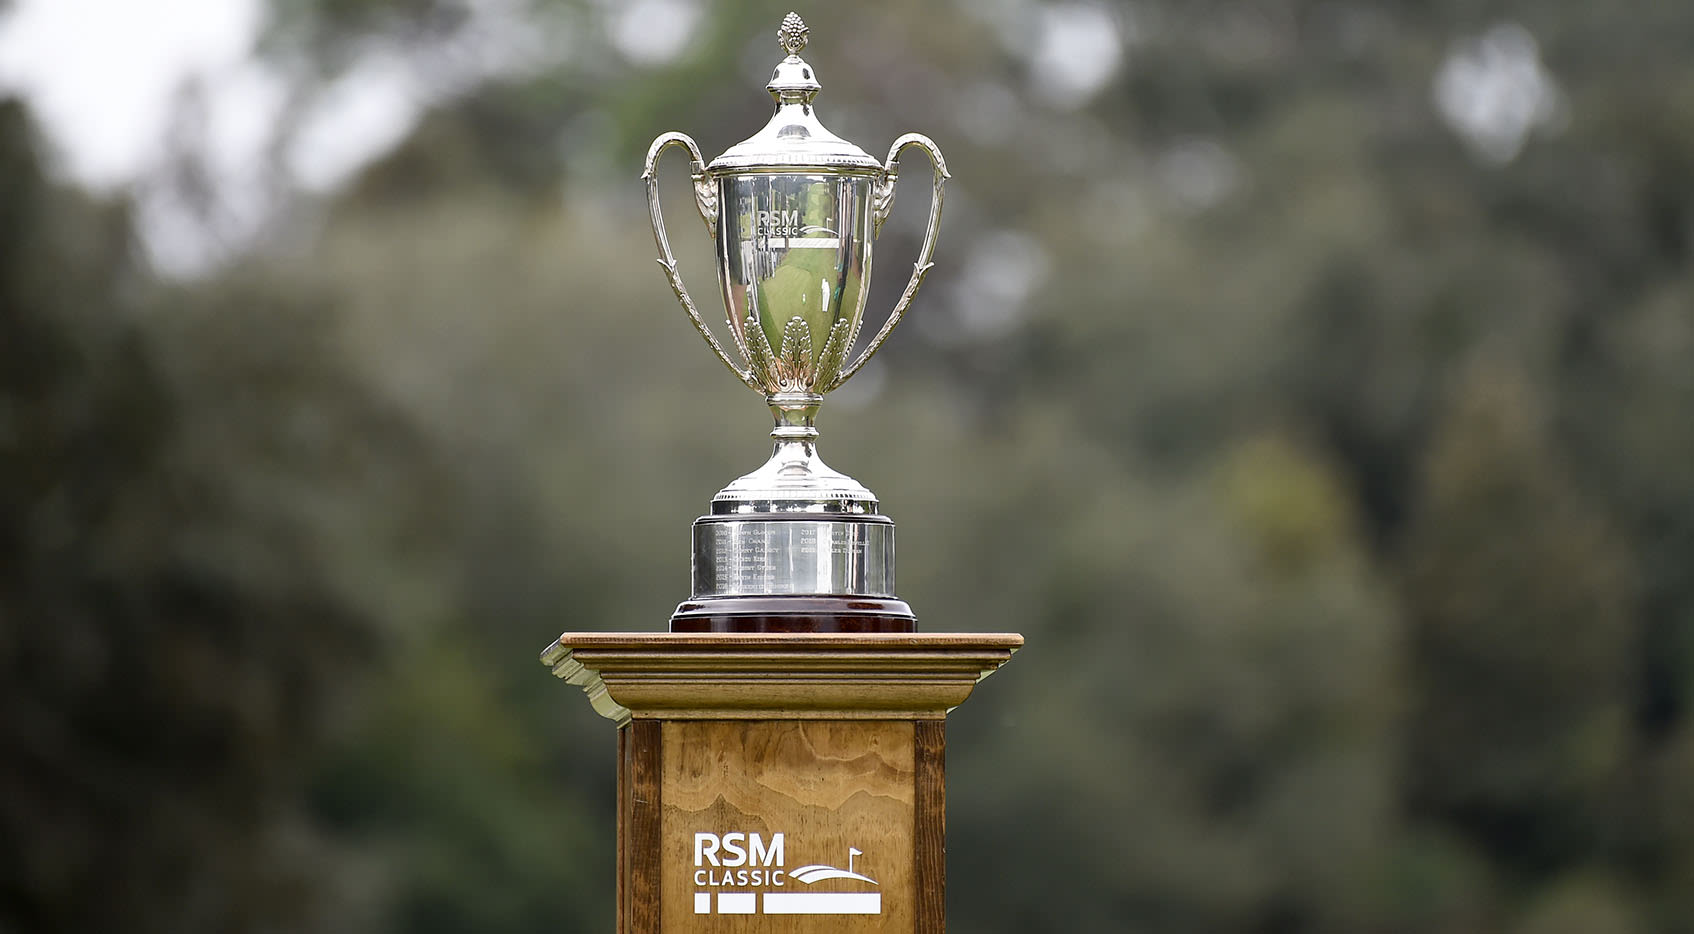 How to watch The RSM Classic, Round 2 Featured Groups, live scores